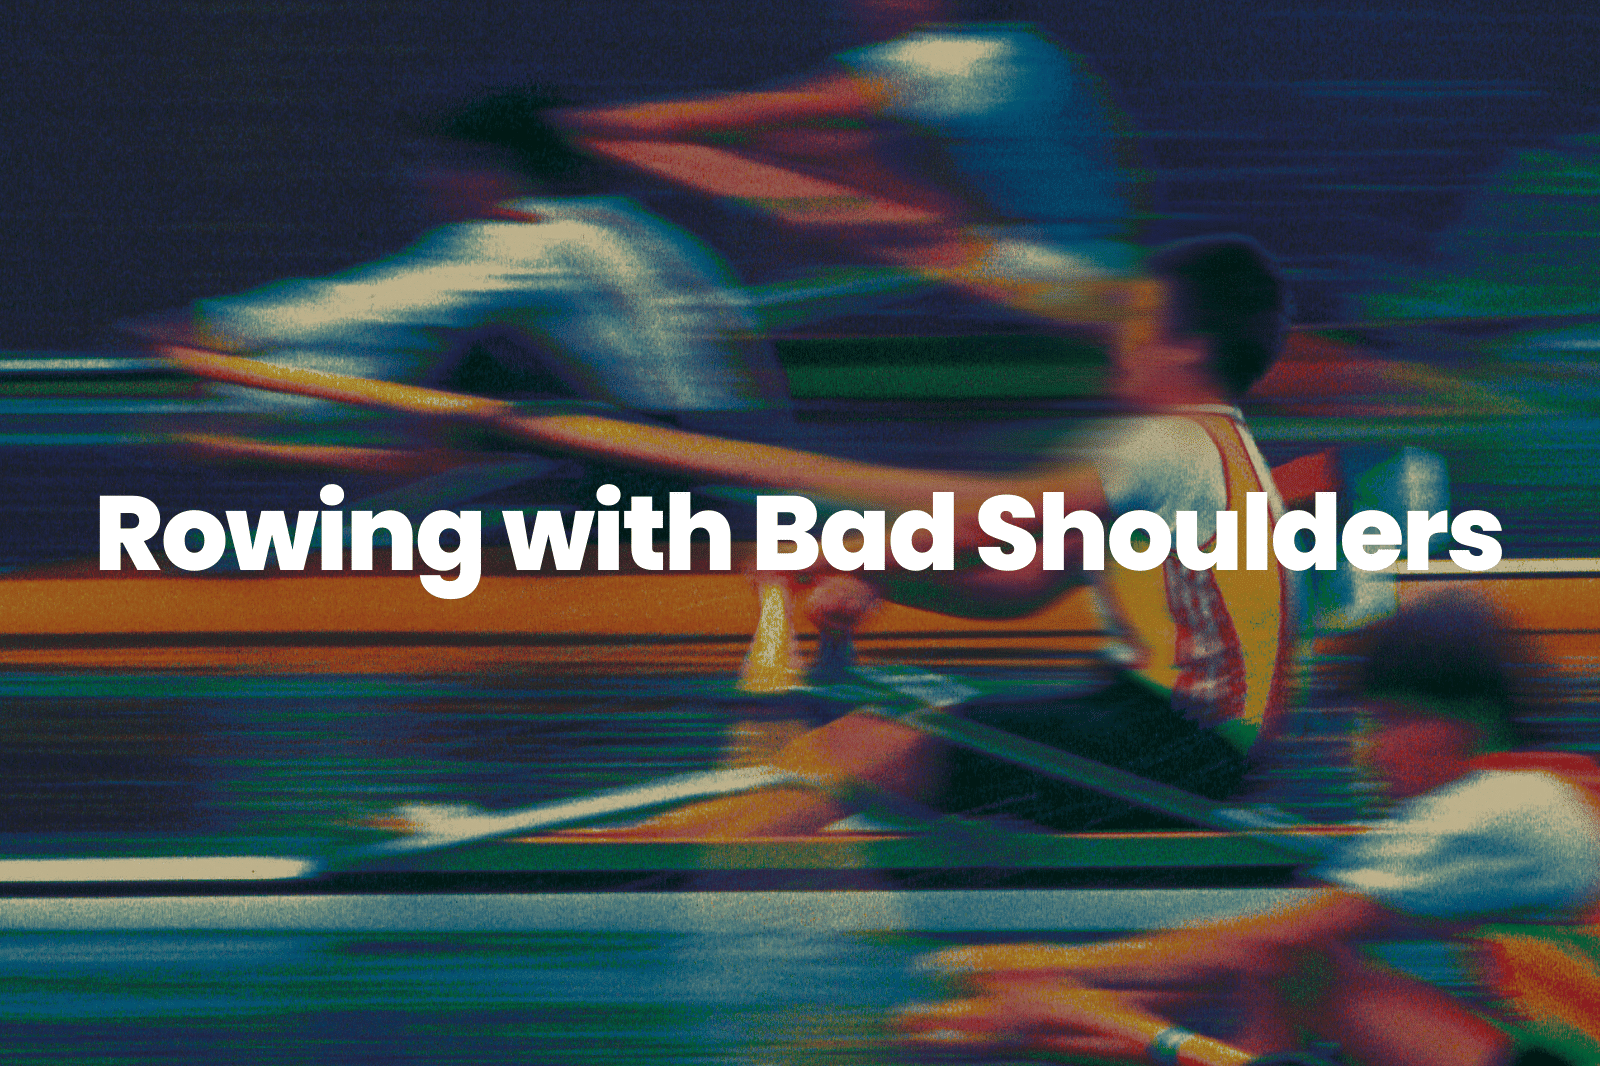 Rowing with Bad Shoulders